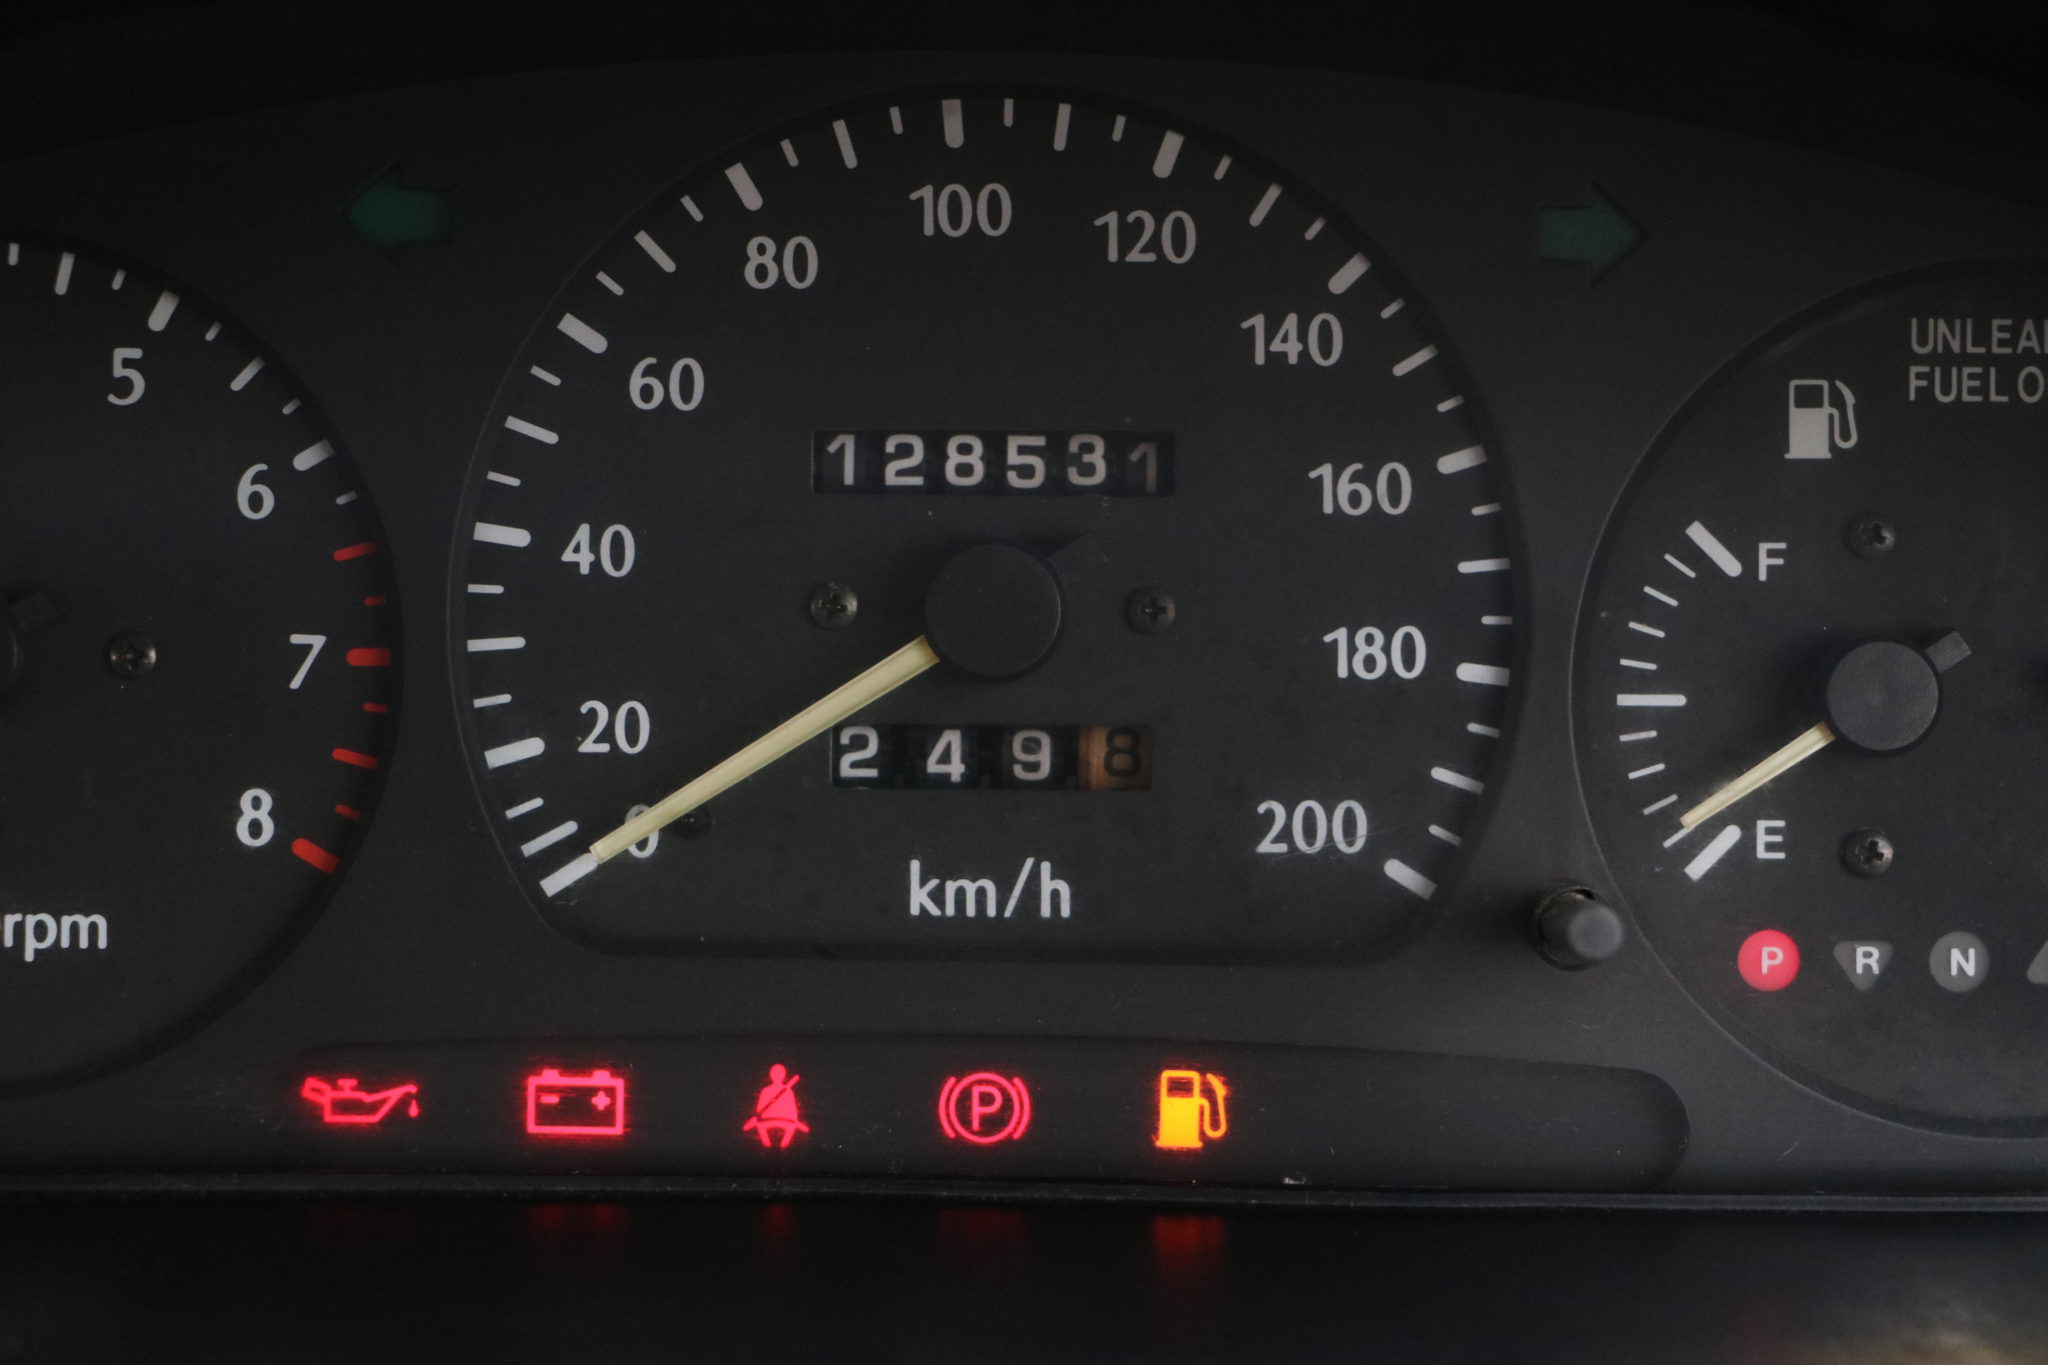 https://autolab.com.co/wp-content/uploads/2022/03/sing-and-symbol-on-car-dashboard-2022-12-07-04-49-47-utc-scaled.jpg